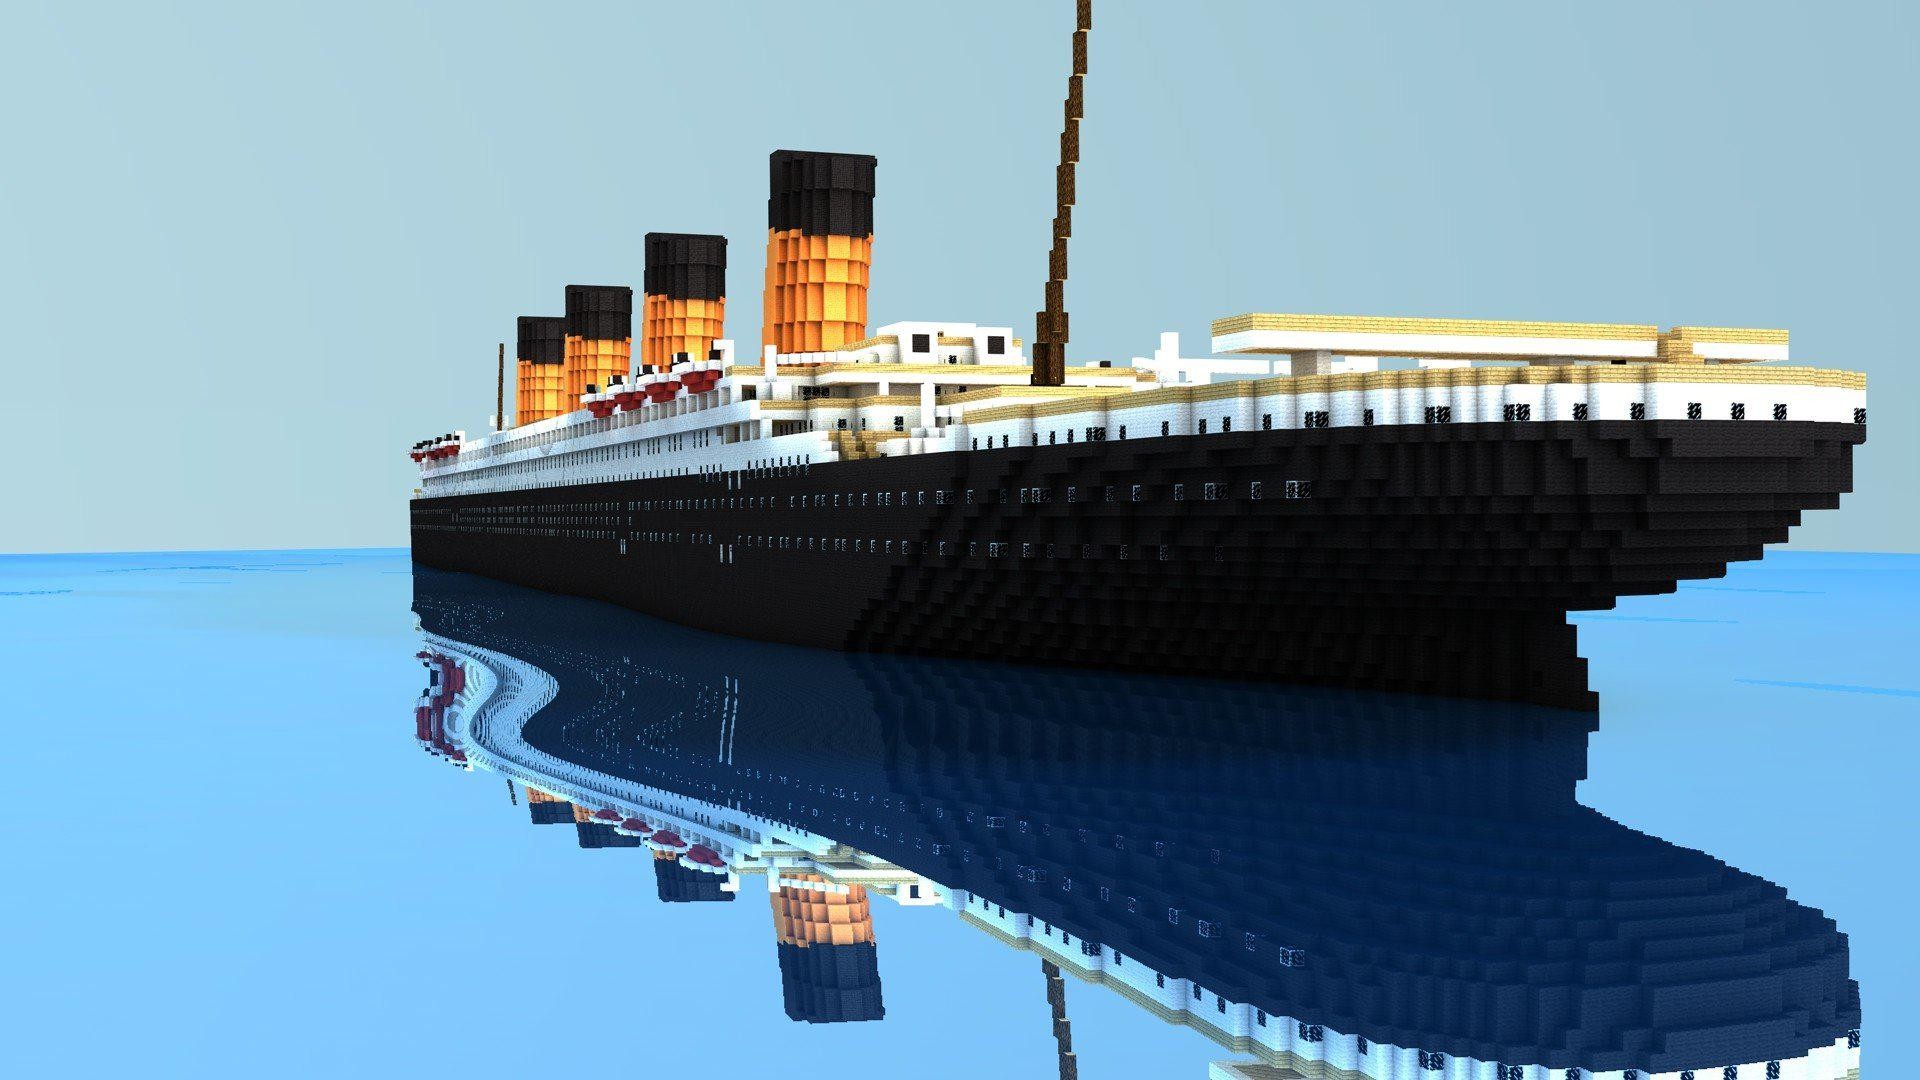 Wallpaper Of Titanic Ship (60+ images)